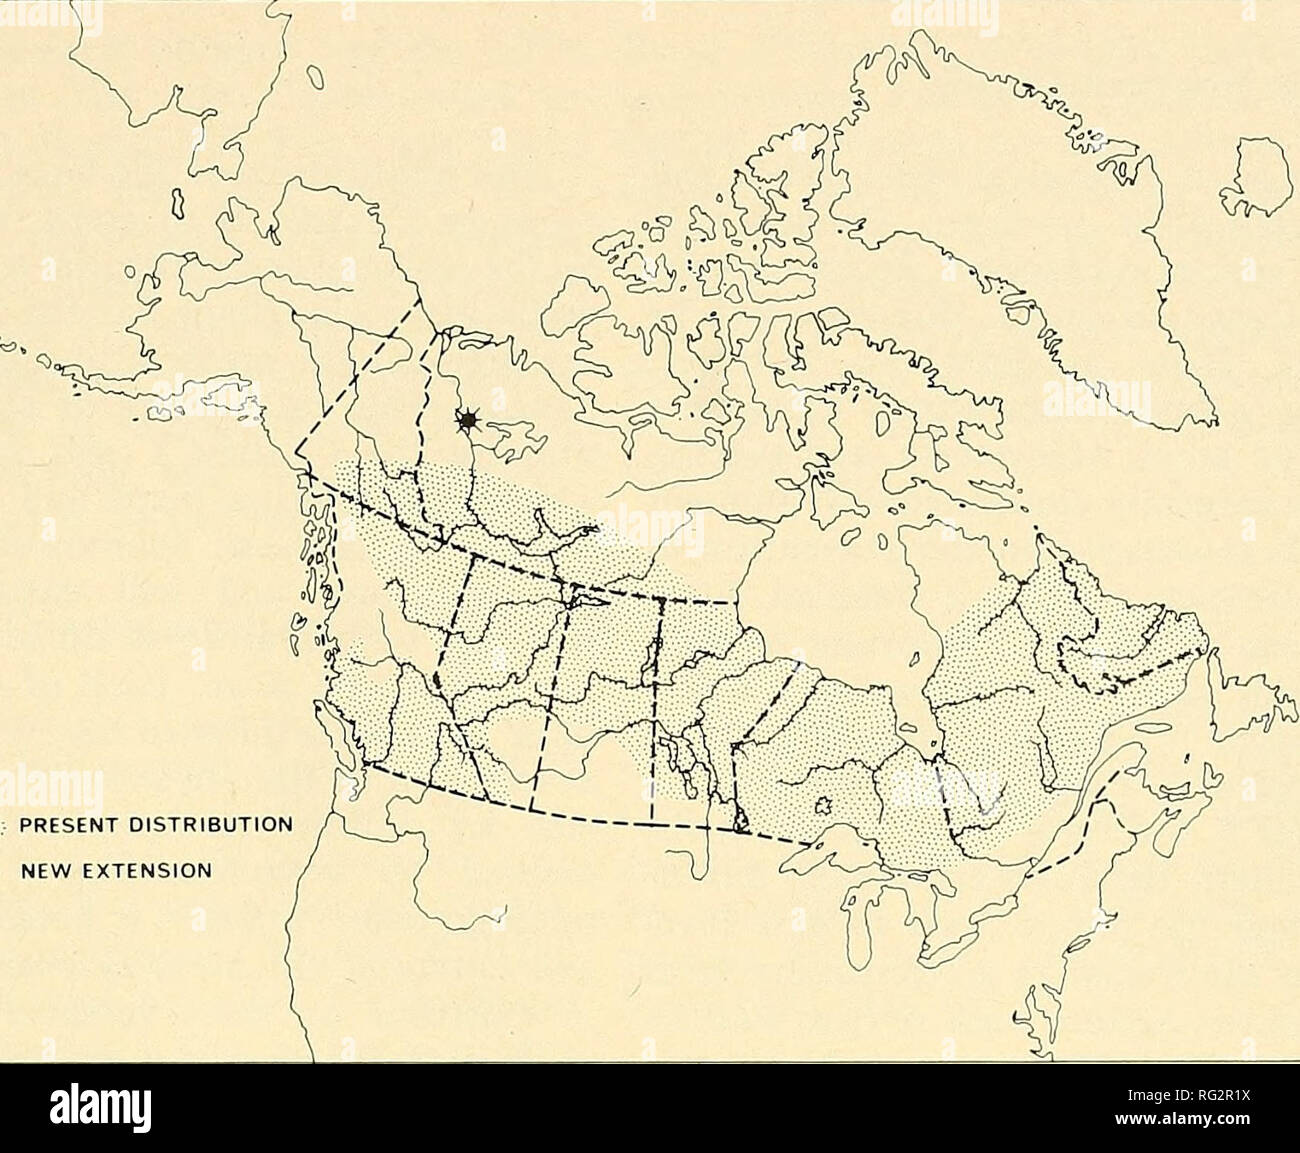 . The Canadian field-naturalist. 1976 Notes 83. ;v.g;S PRESENT DISTRIBUTION -i- NEW EXTENSION Figure l. Canadian distribution of the heather vole, Phenacomys intermedius, with range extension indicated. north of that latitude. The first specimen was captured on a compara- tively dry knoll moraine in a dense stand of black spruce (Picea mariana) with some intermixed larch {Larix laricina) and birch (Betula papyrifera). The ground cover was predominantly lichen (Cladonia spp.) and mosses {Hylocomium sp. and Aulo- comium sp.) with a light covering of Ledum groenlandicum, Vaccinium vitis-idaea, an Stock Photo